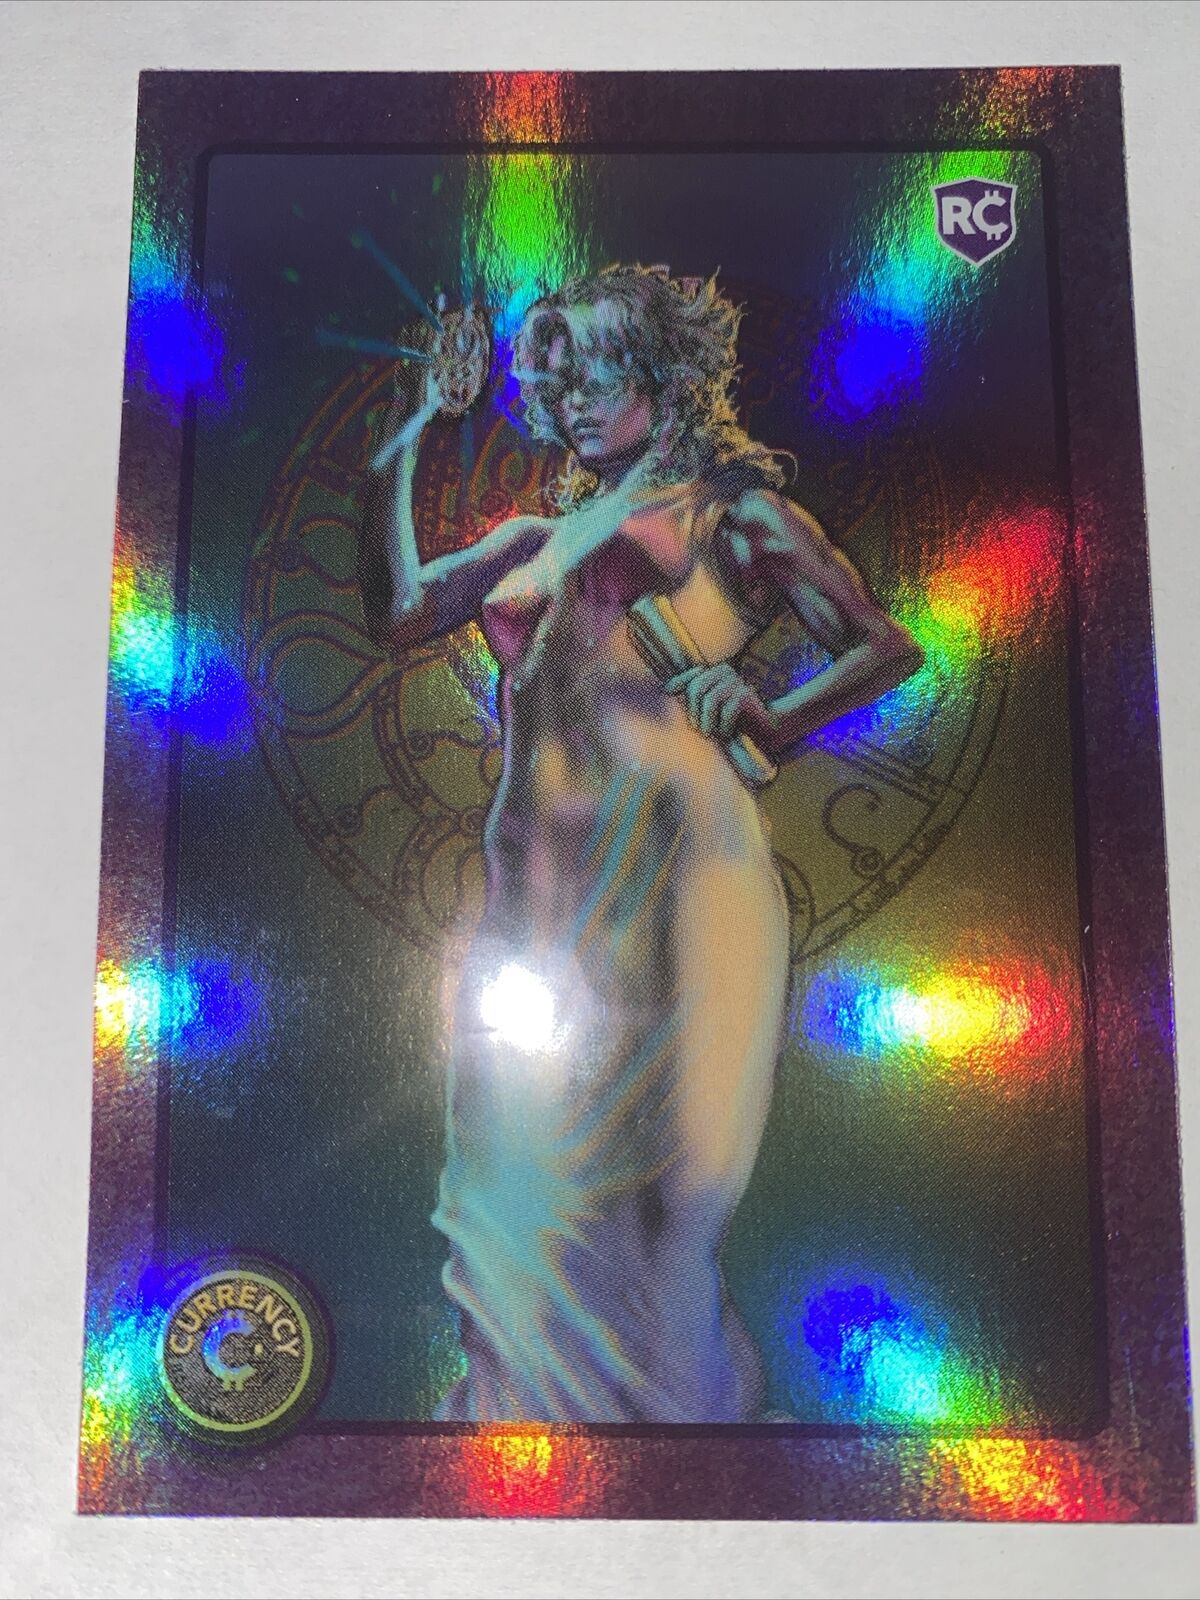 2023 Cardsmiths Currency Series 2 #27 Hypatia RC Holo Foil Rare